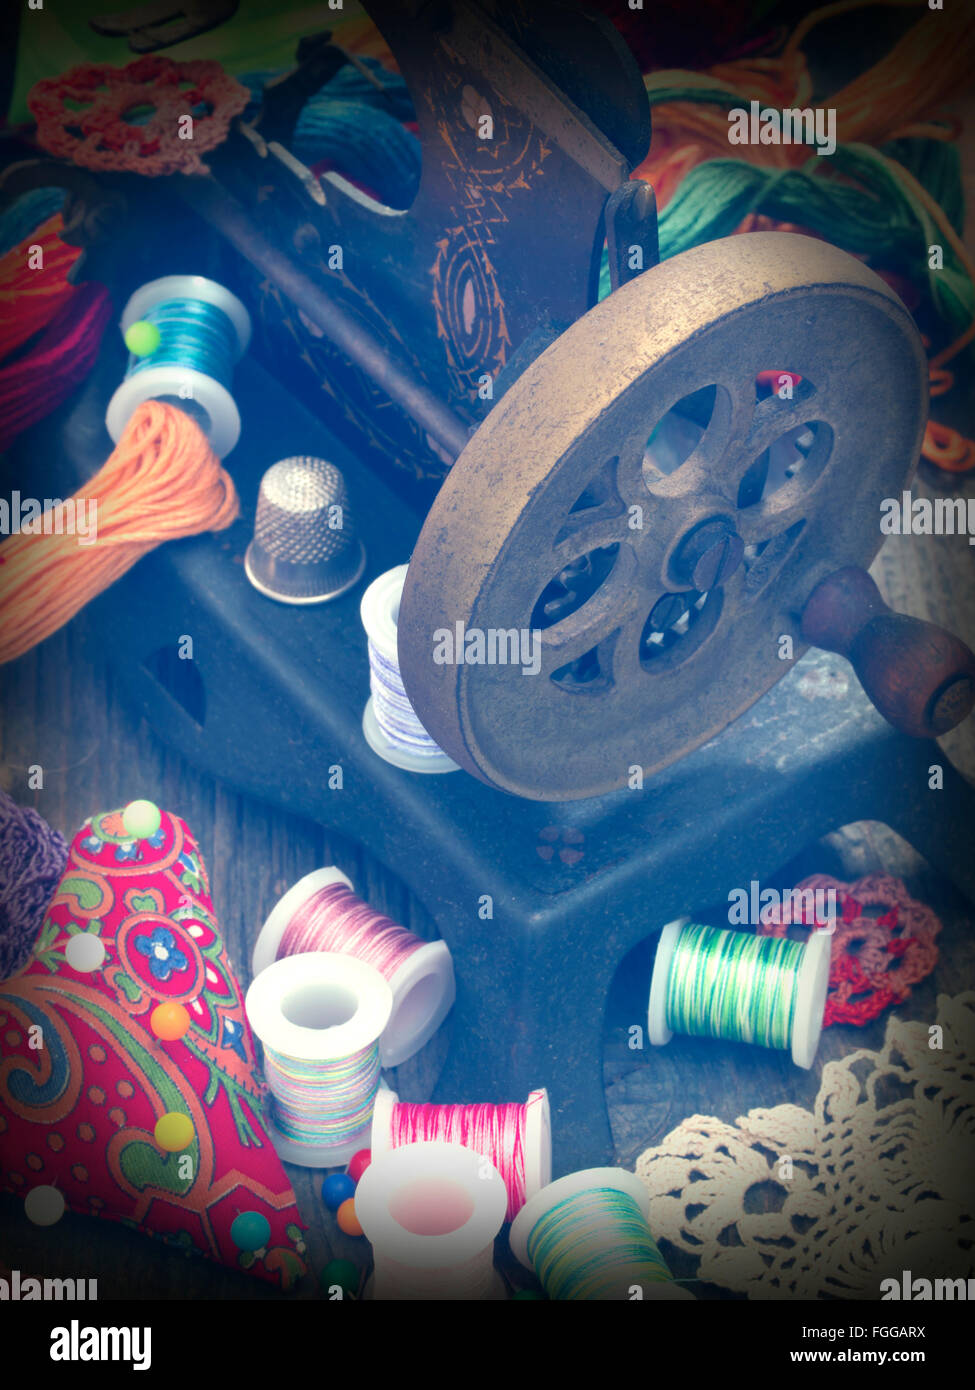 sewing machine with sewing equipment Stock Photo